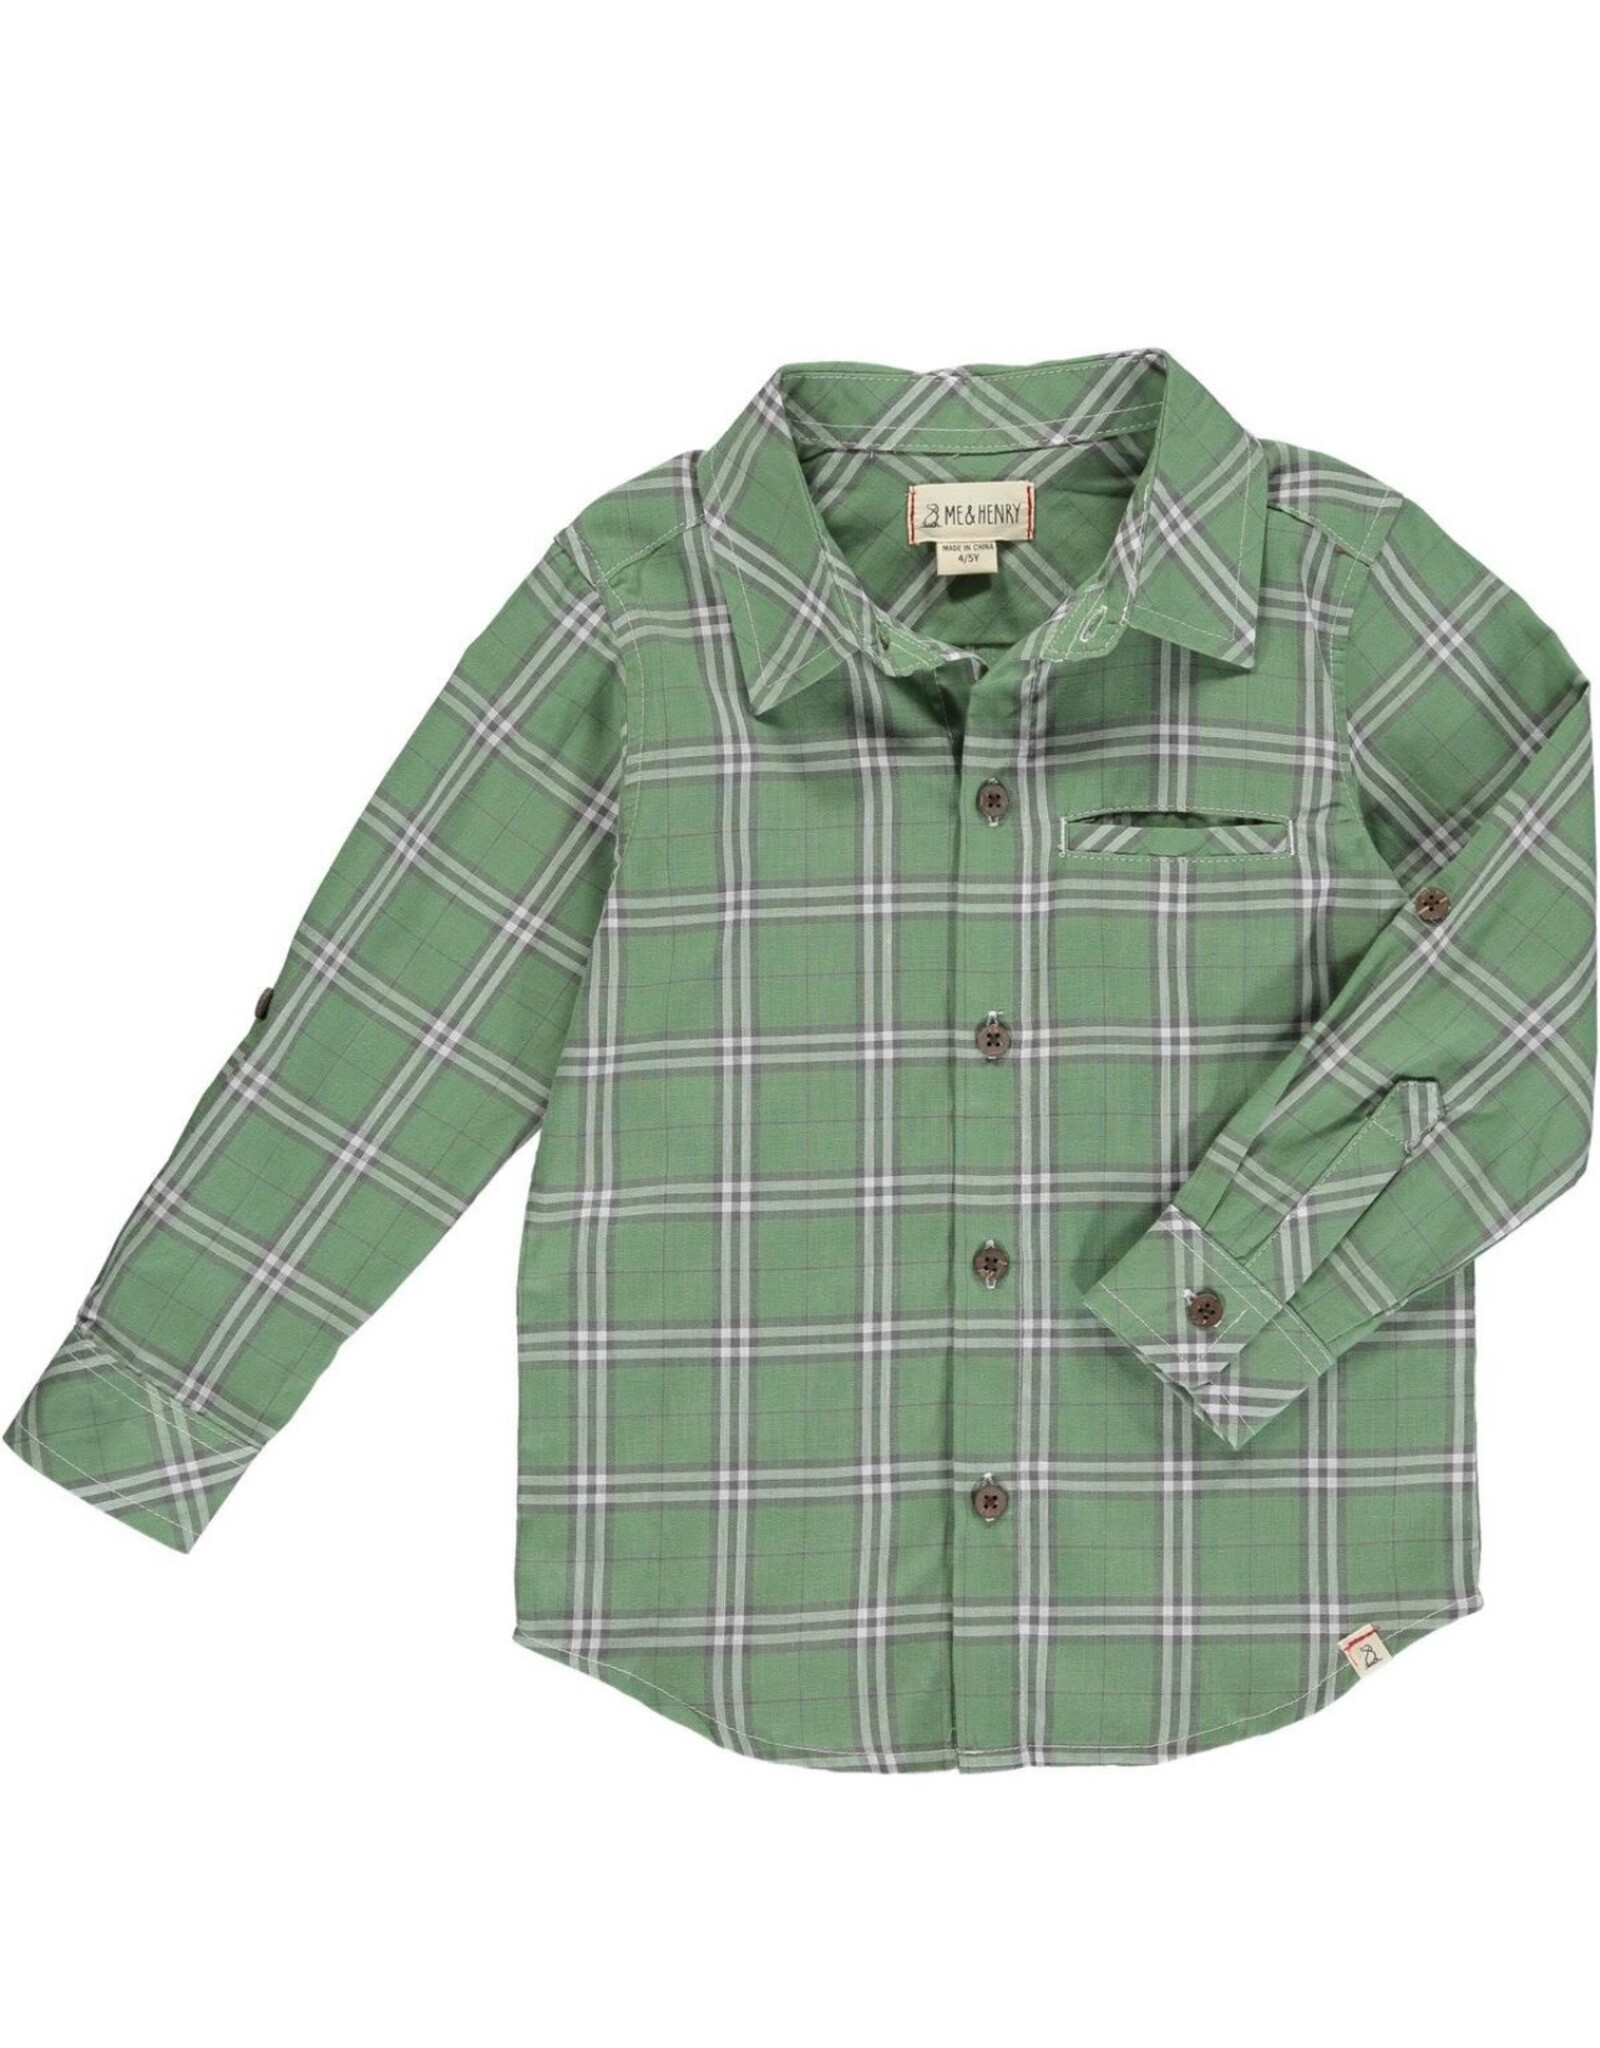 Me & Henry Me & Henry- Atwood: Sage Plaid